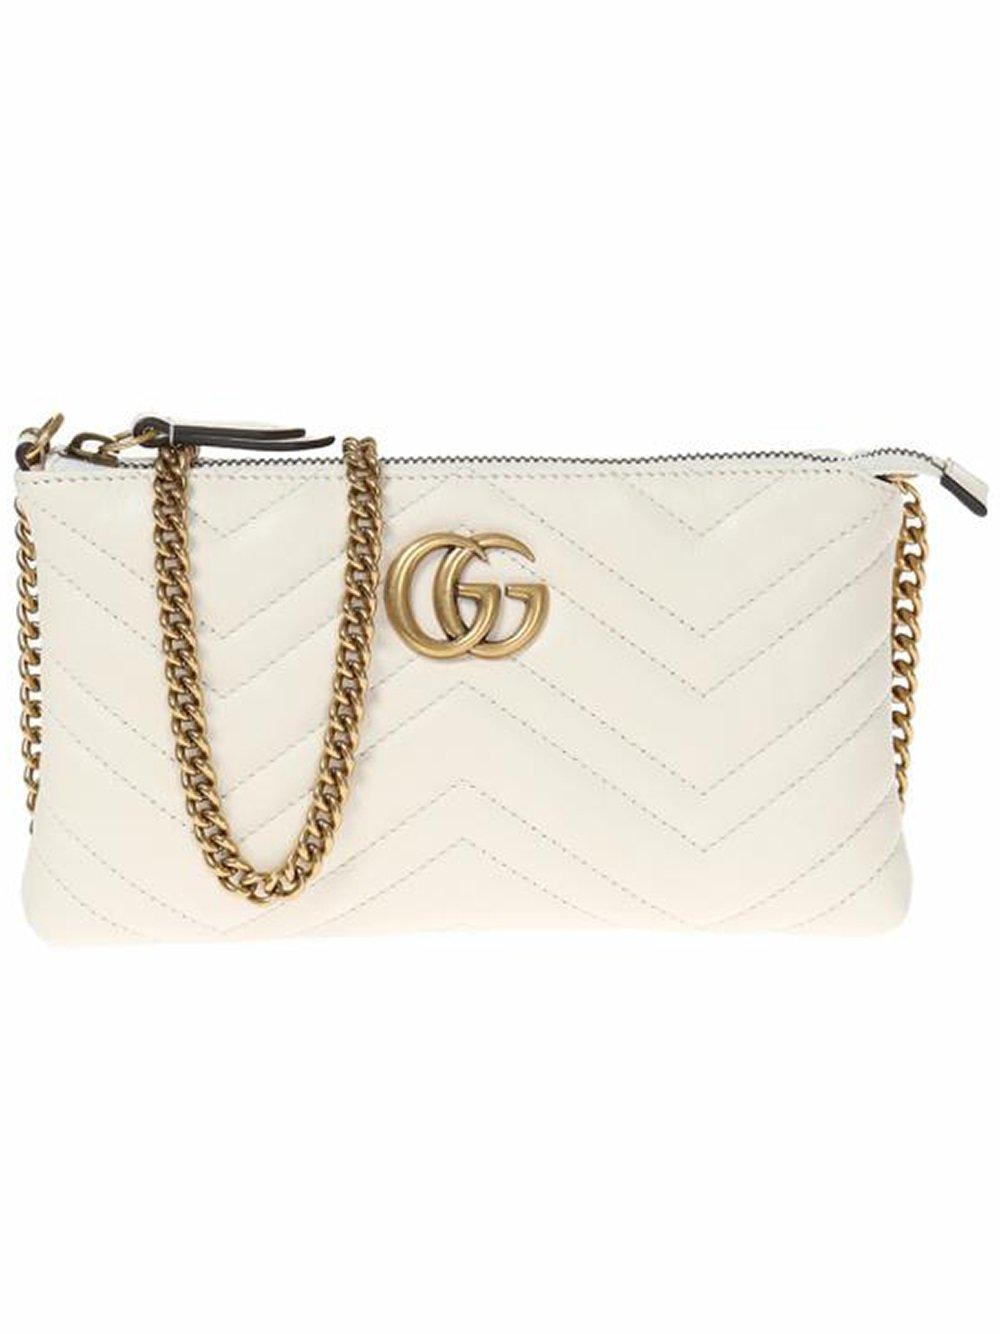 Lyst - Gucci Gg Marmont Wallet Crossbody Bag in Natural